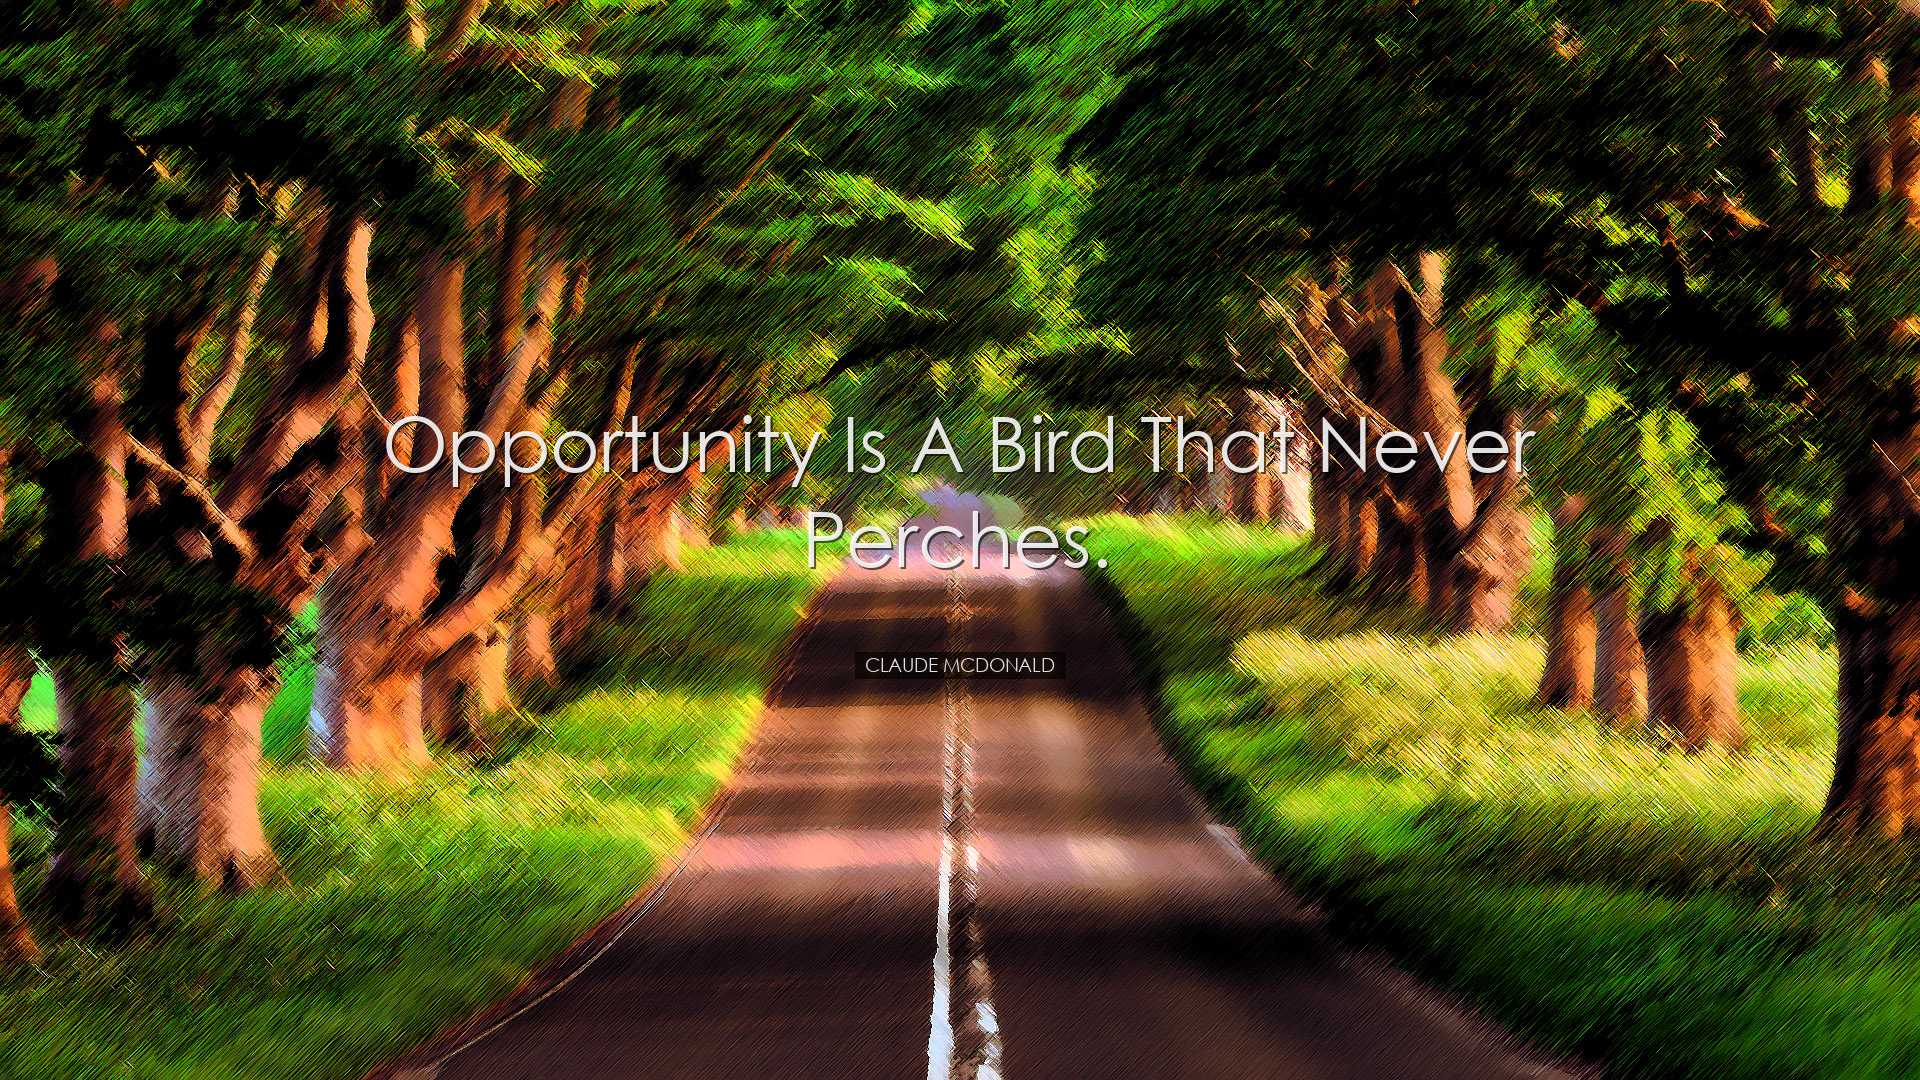 Opportunity is a bird that never perches. - Claude McDonald